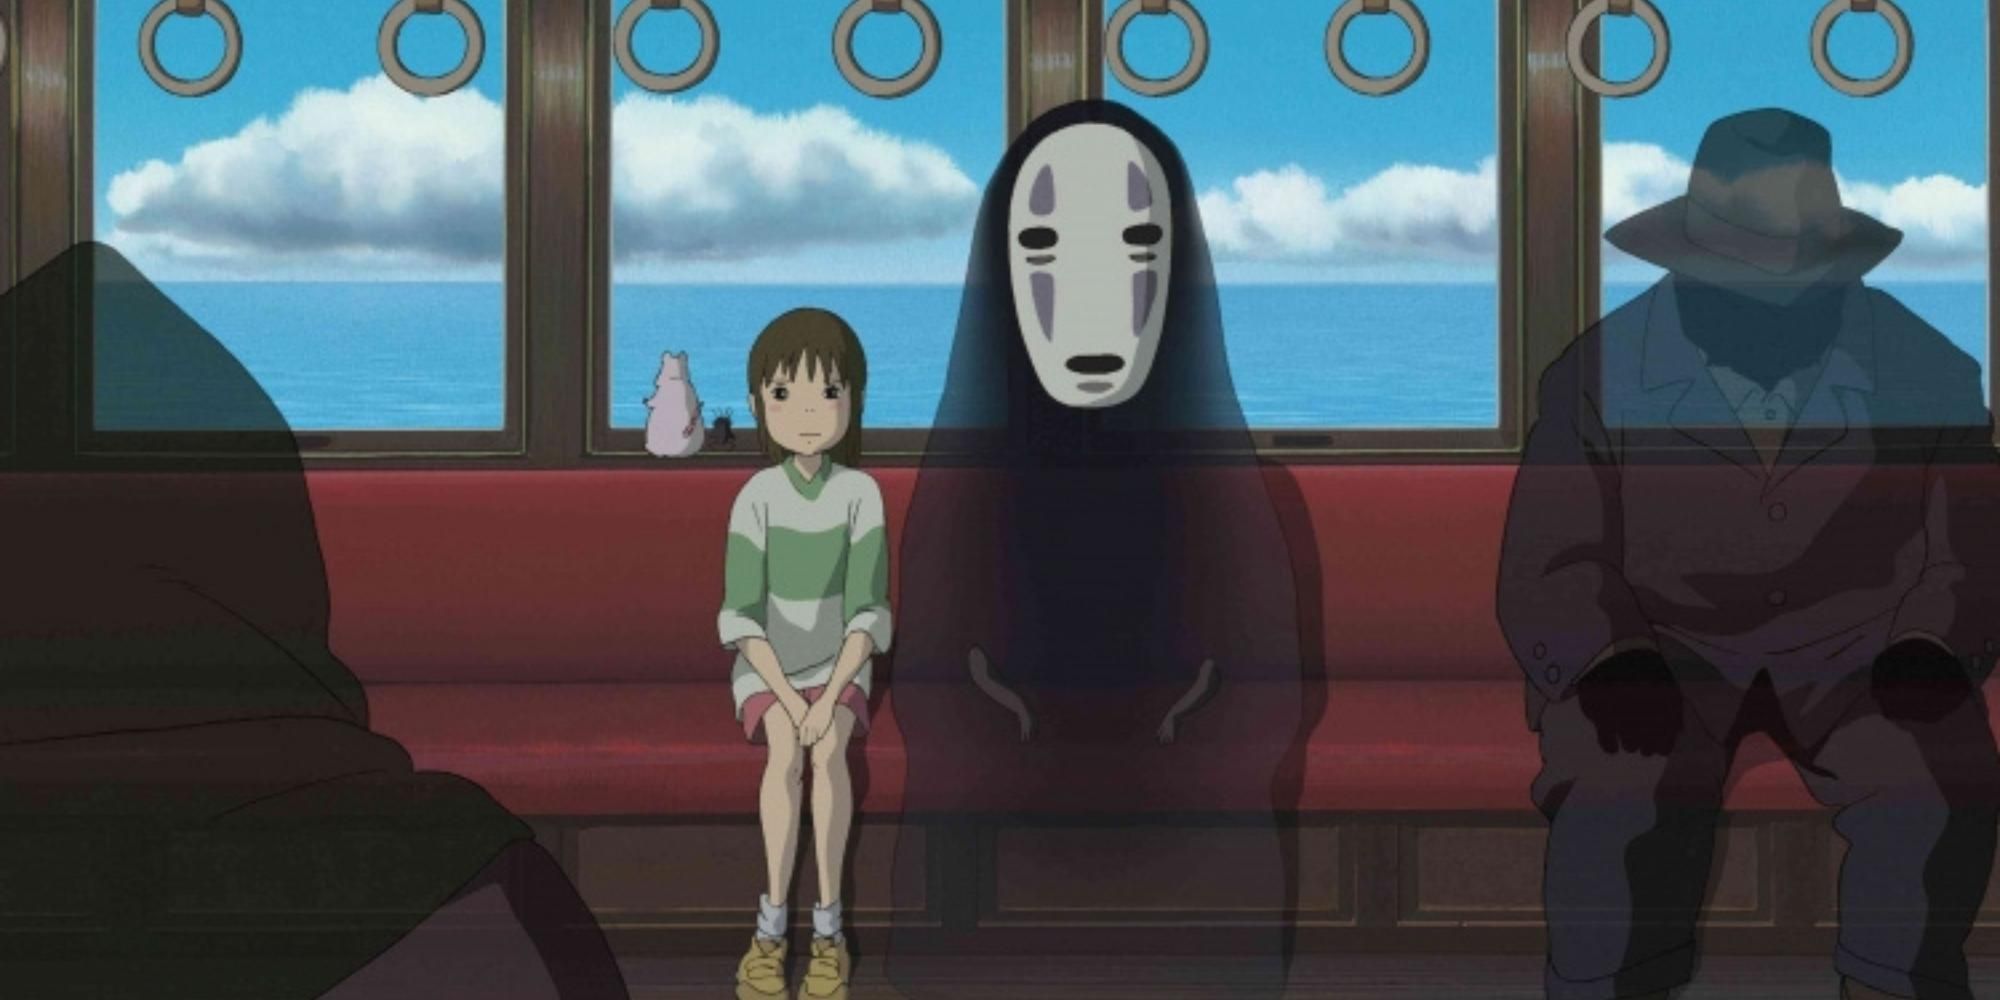 Chirio and No Face riding the train in Spirited Away